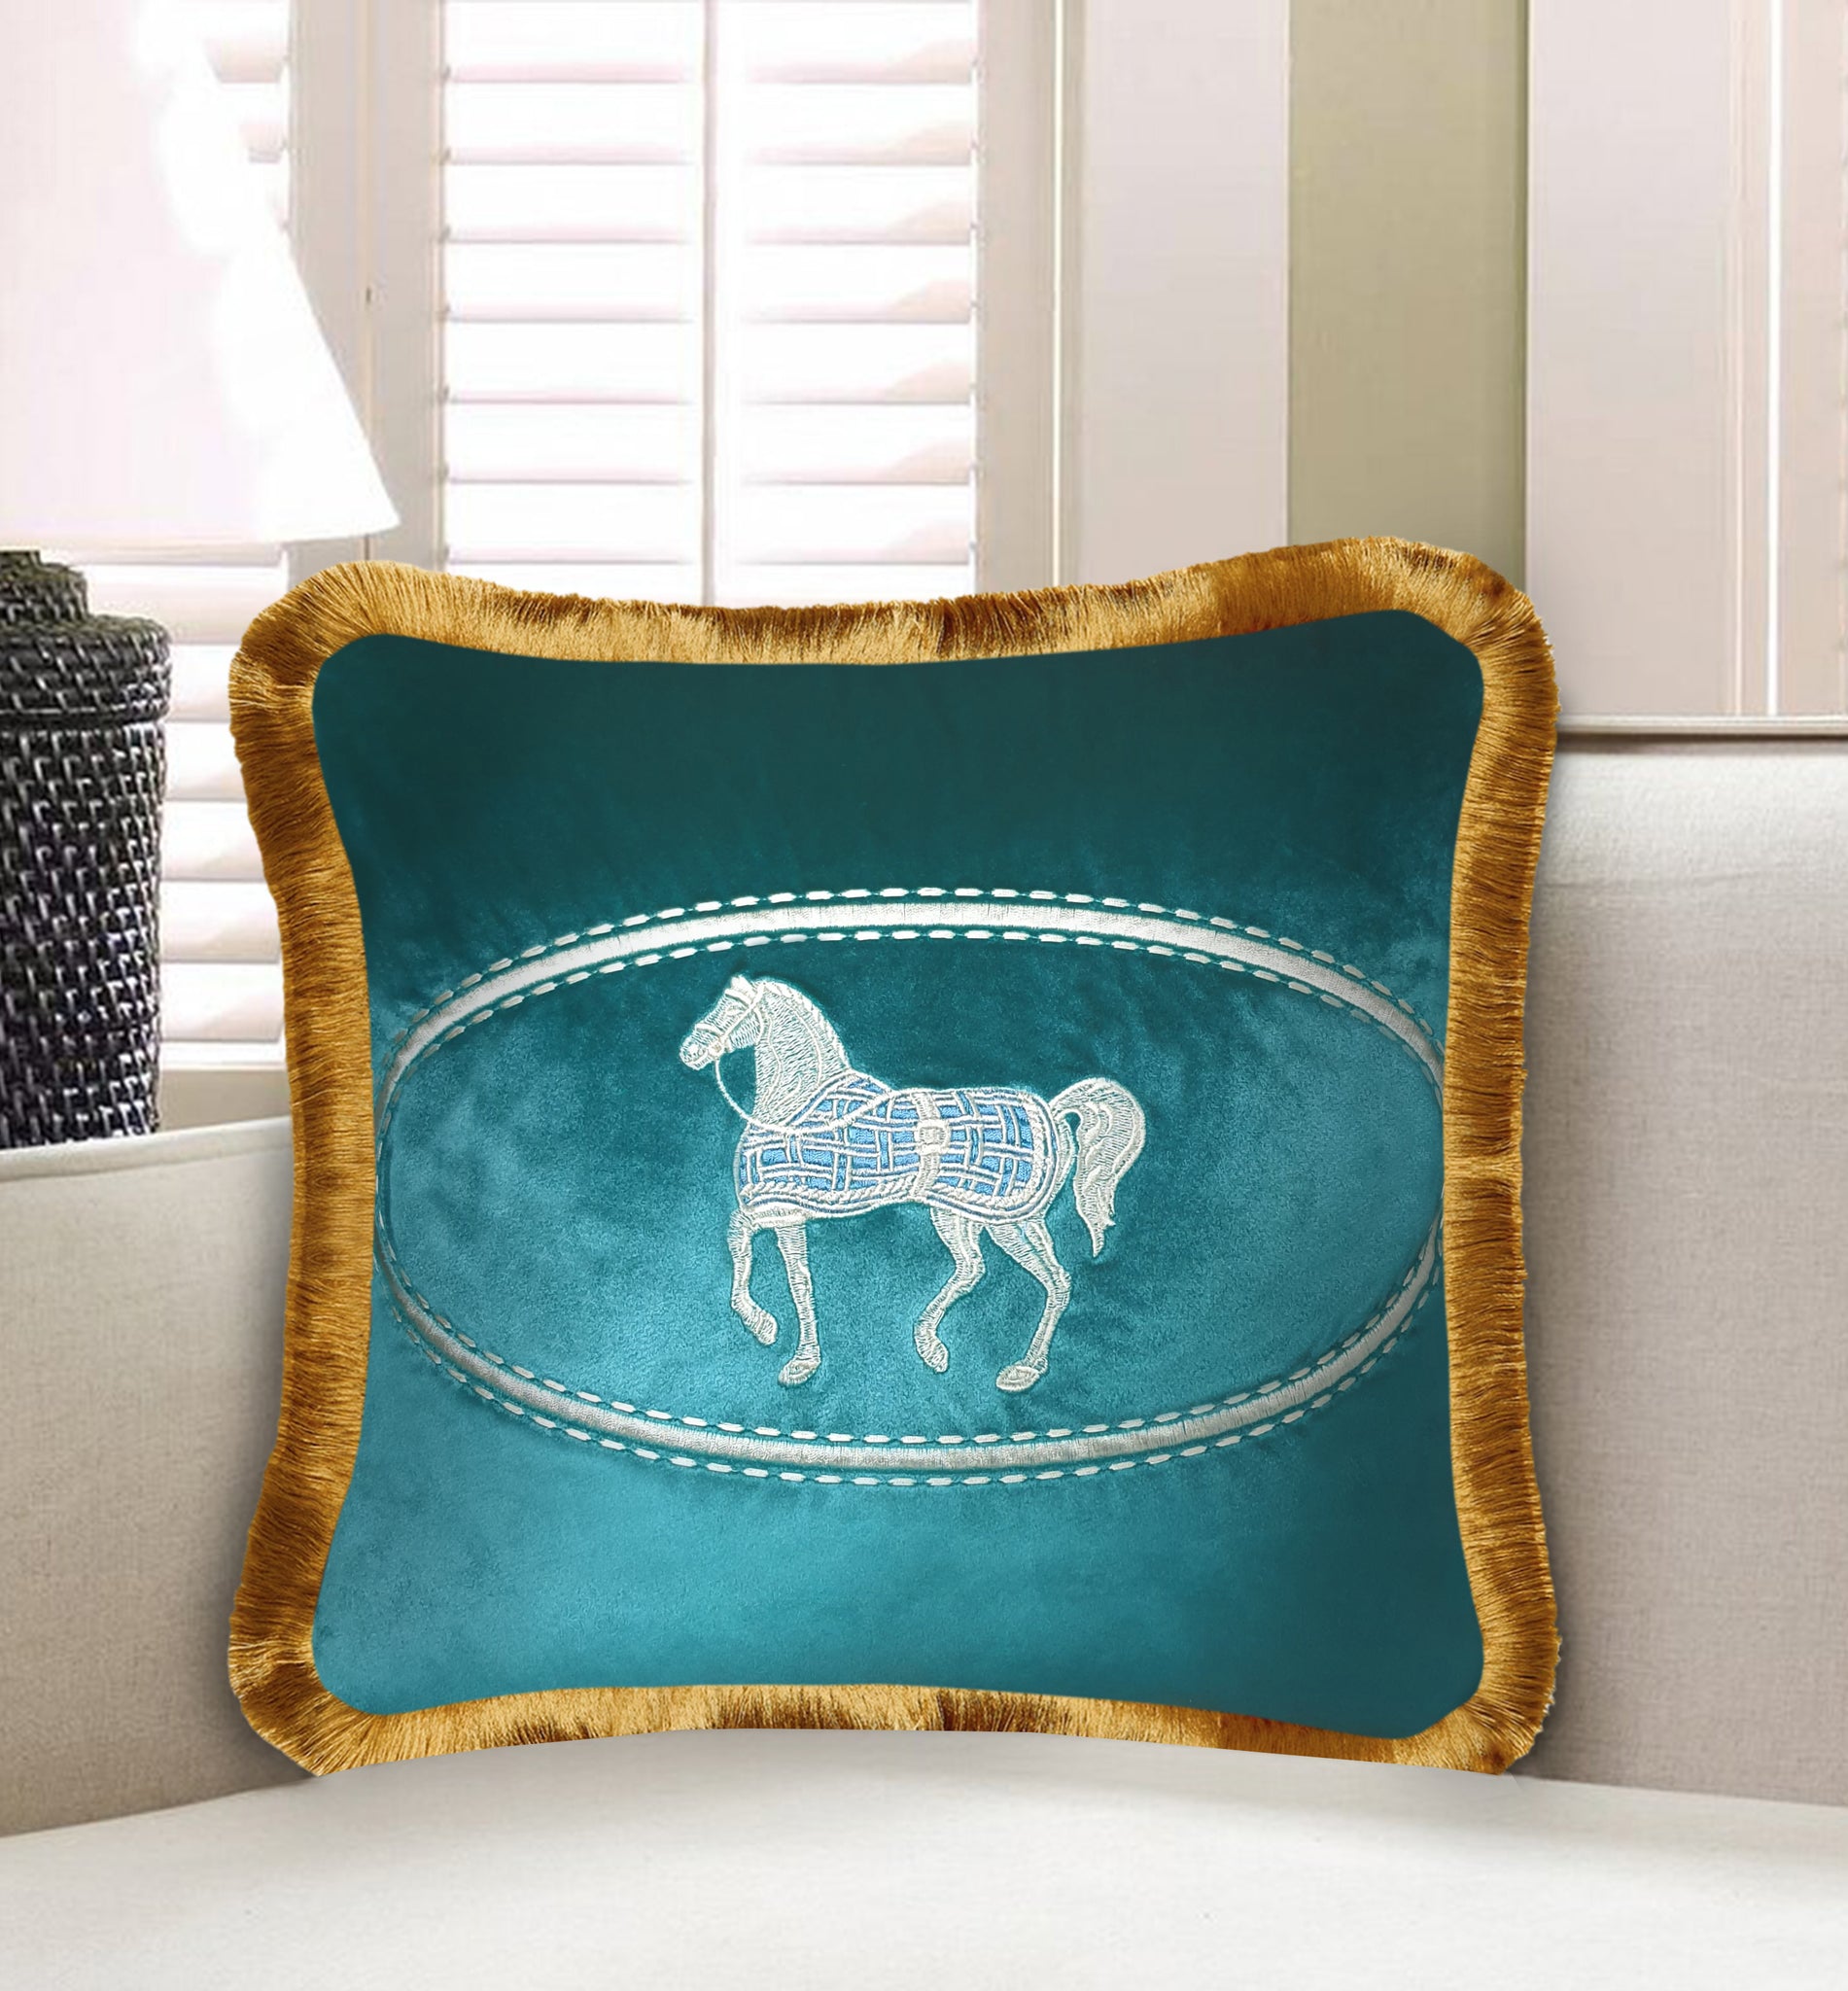 Velvet Embroidered Pony Cushion Cover, Classic Horse Decorative Pillowcase, Home Decor Throw Pillow with Fringe for Bedroom, Living Room, 45x45 cm 18x18 In ,